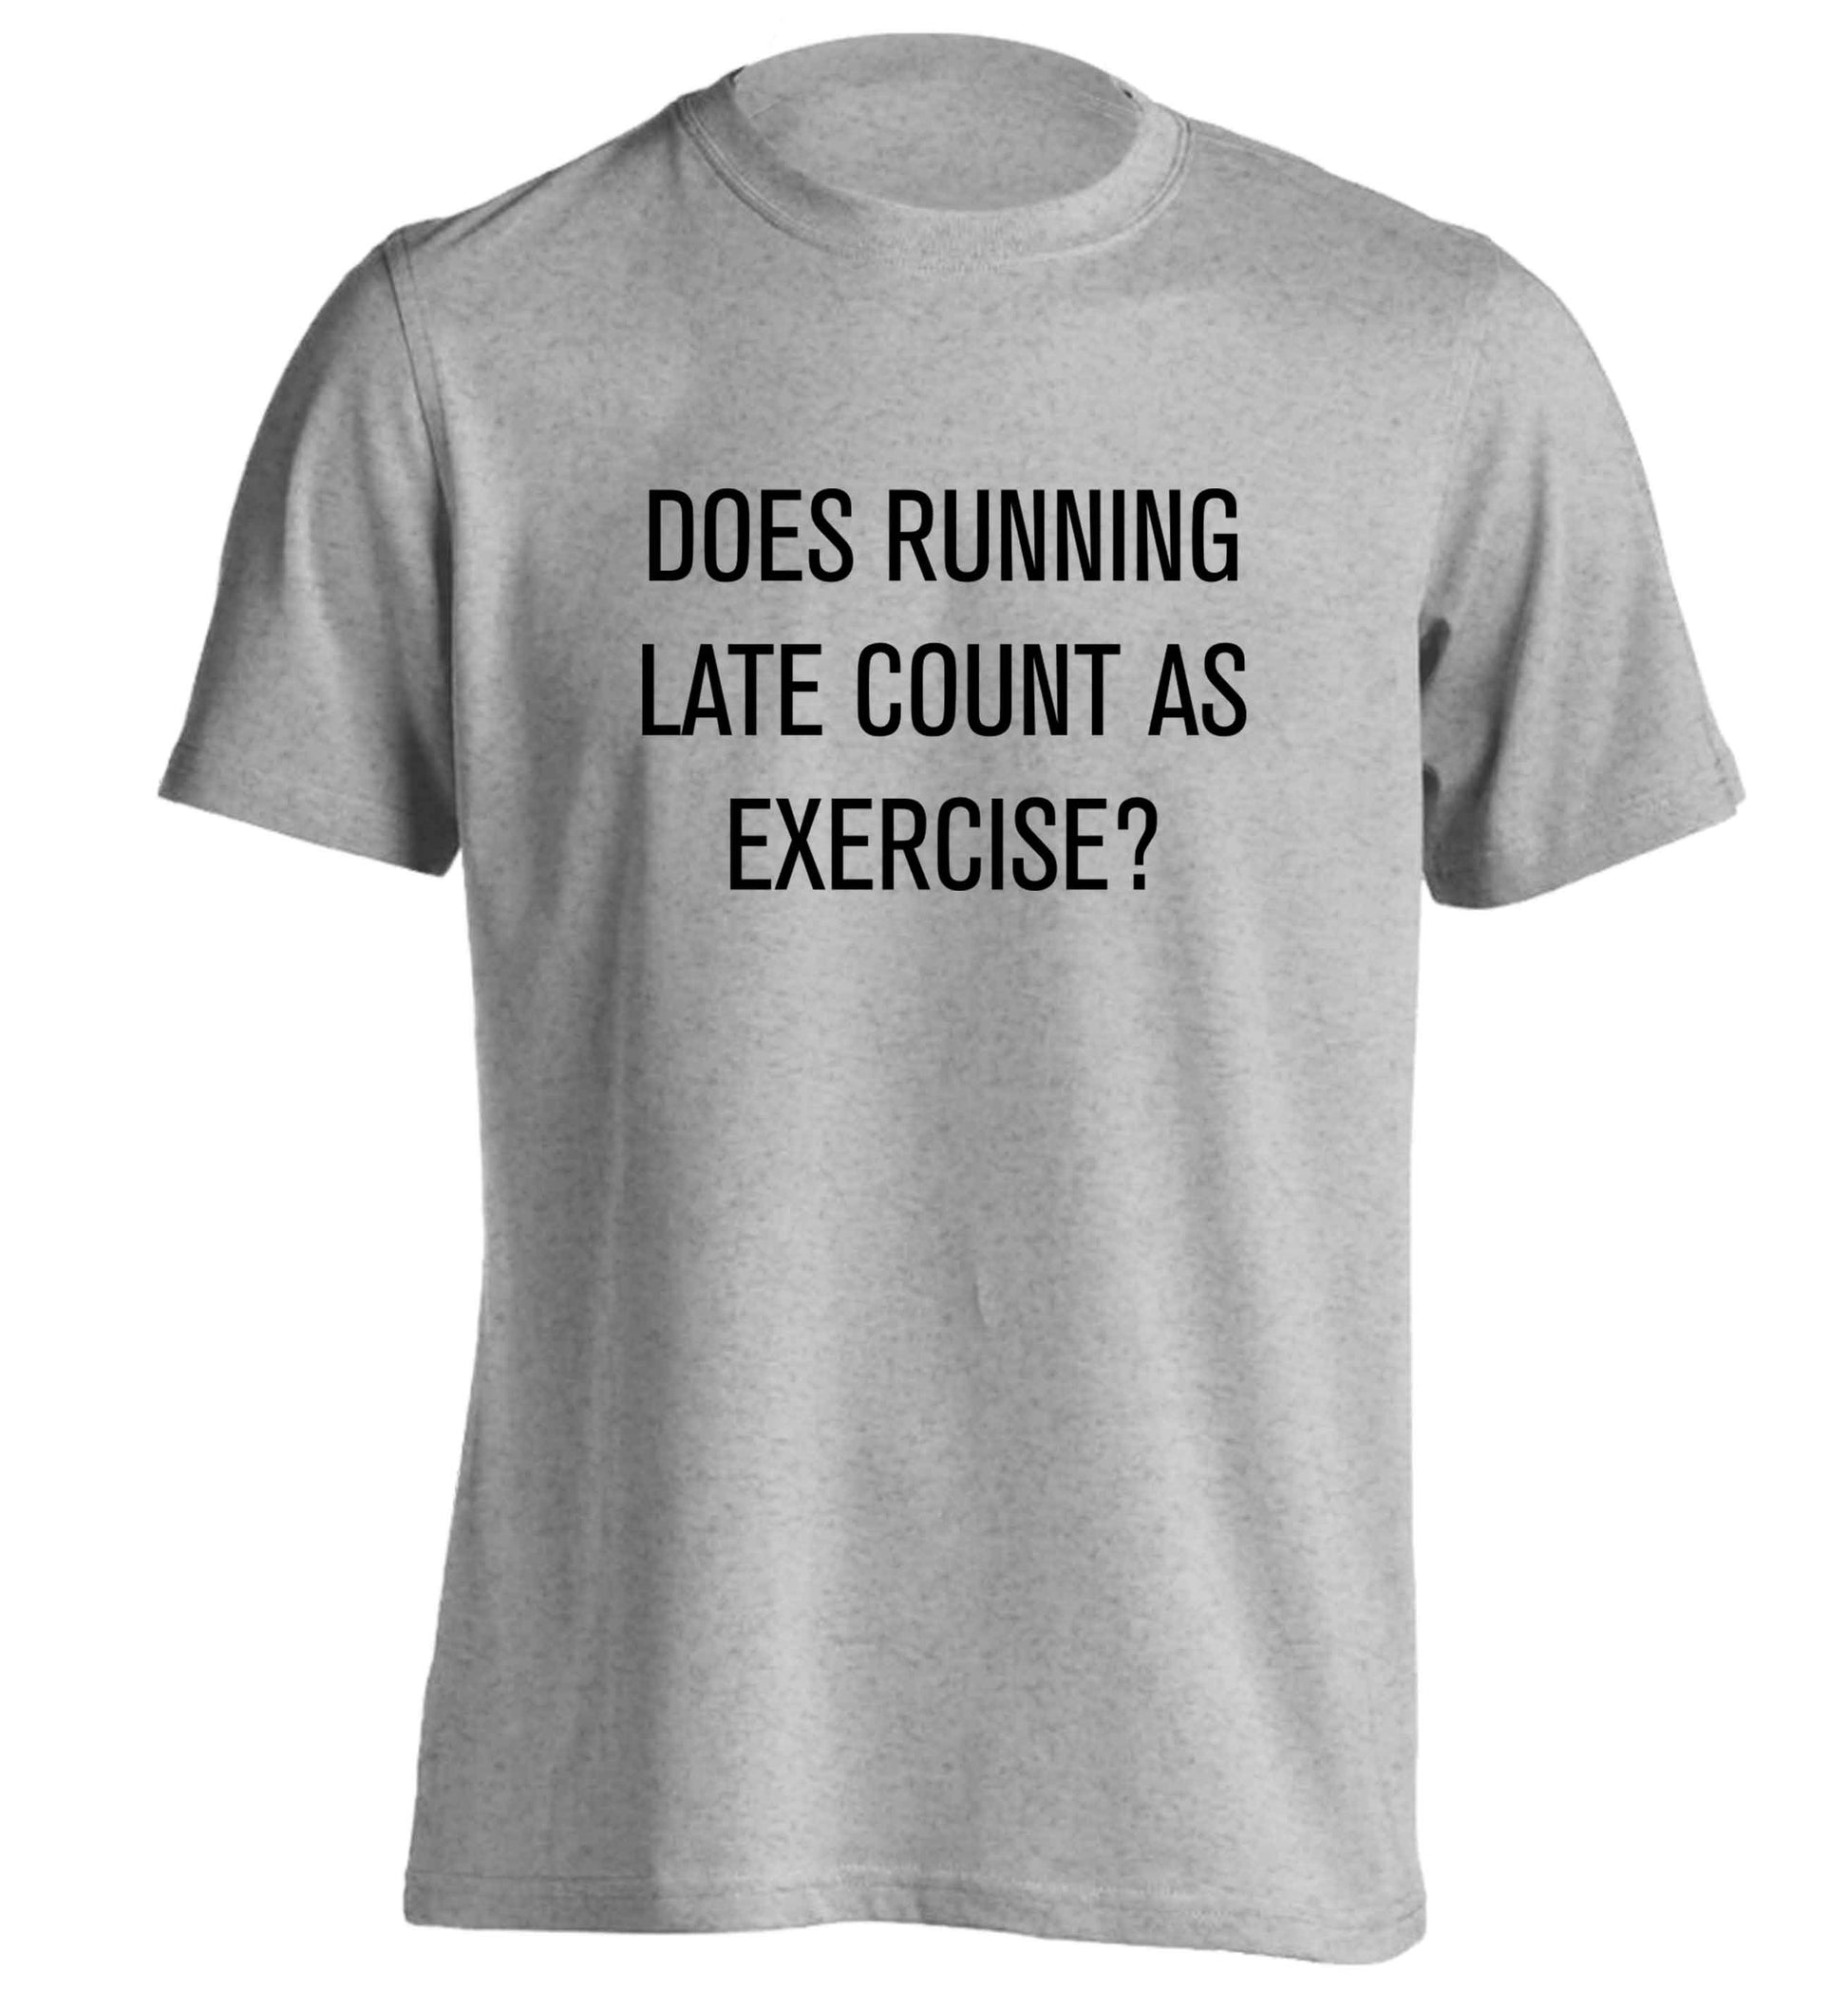 Does running late count as exercise? adults unisex grey Tshirt 2XL